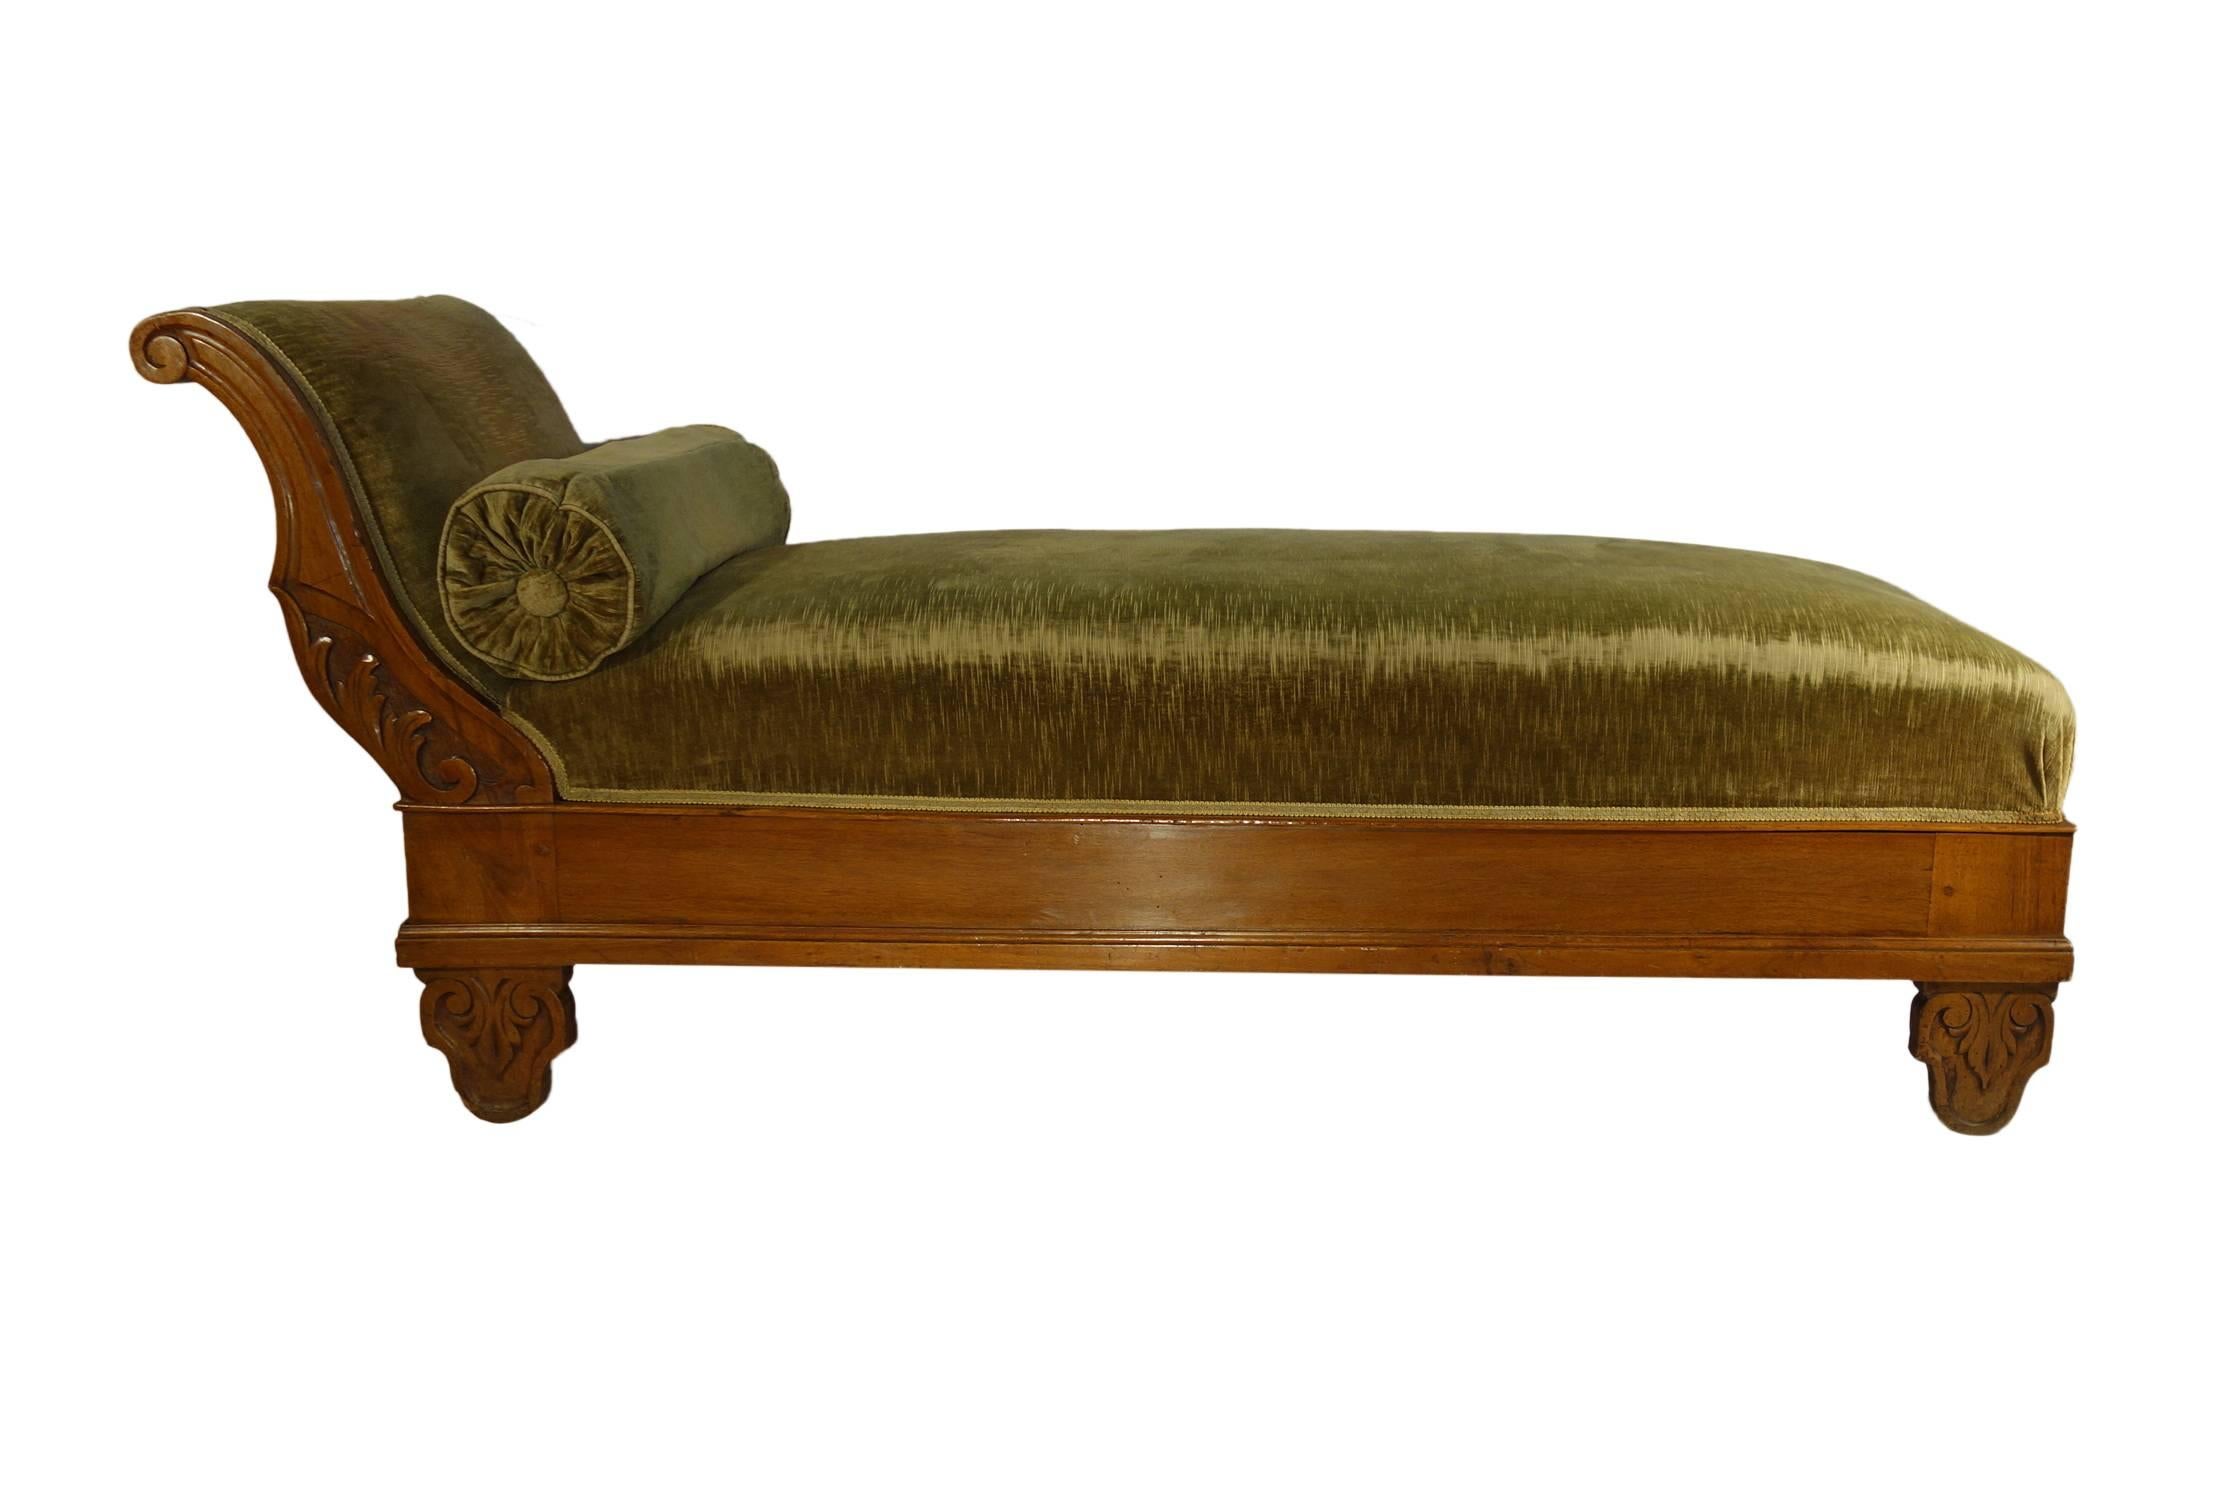 Lovely and elegant dormeuse, dressed in sage chenille. Romantic period, circa 1860. Lombard Veneto area, solid walnut, hand styled decoration.

Dimensions:  68.5" W, 23.5" D, 29" H.